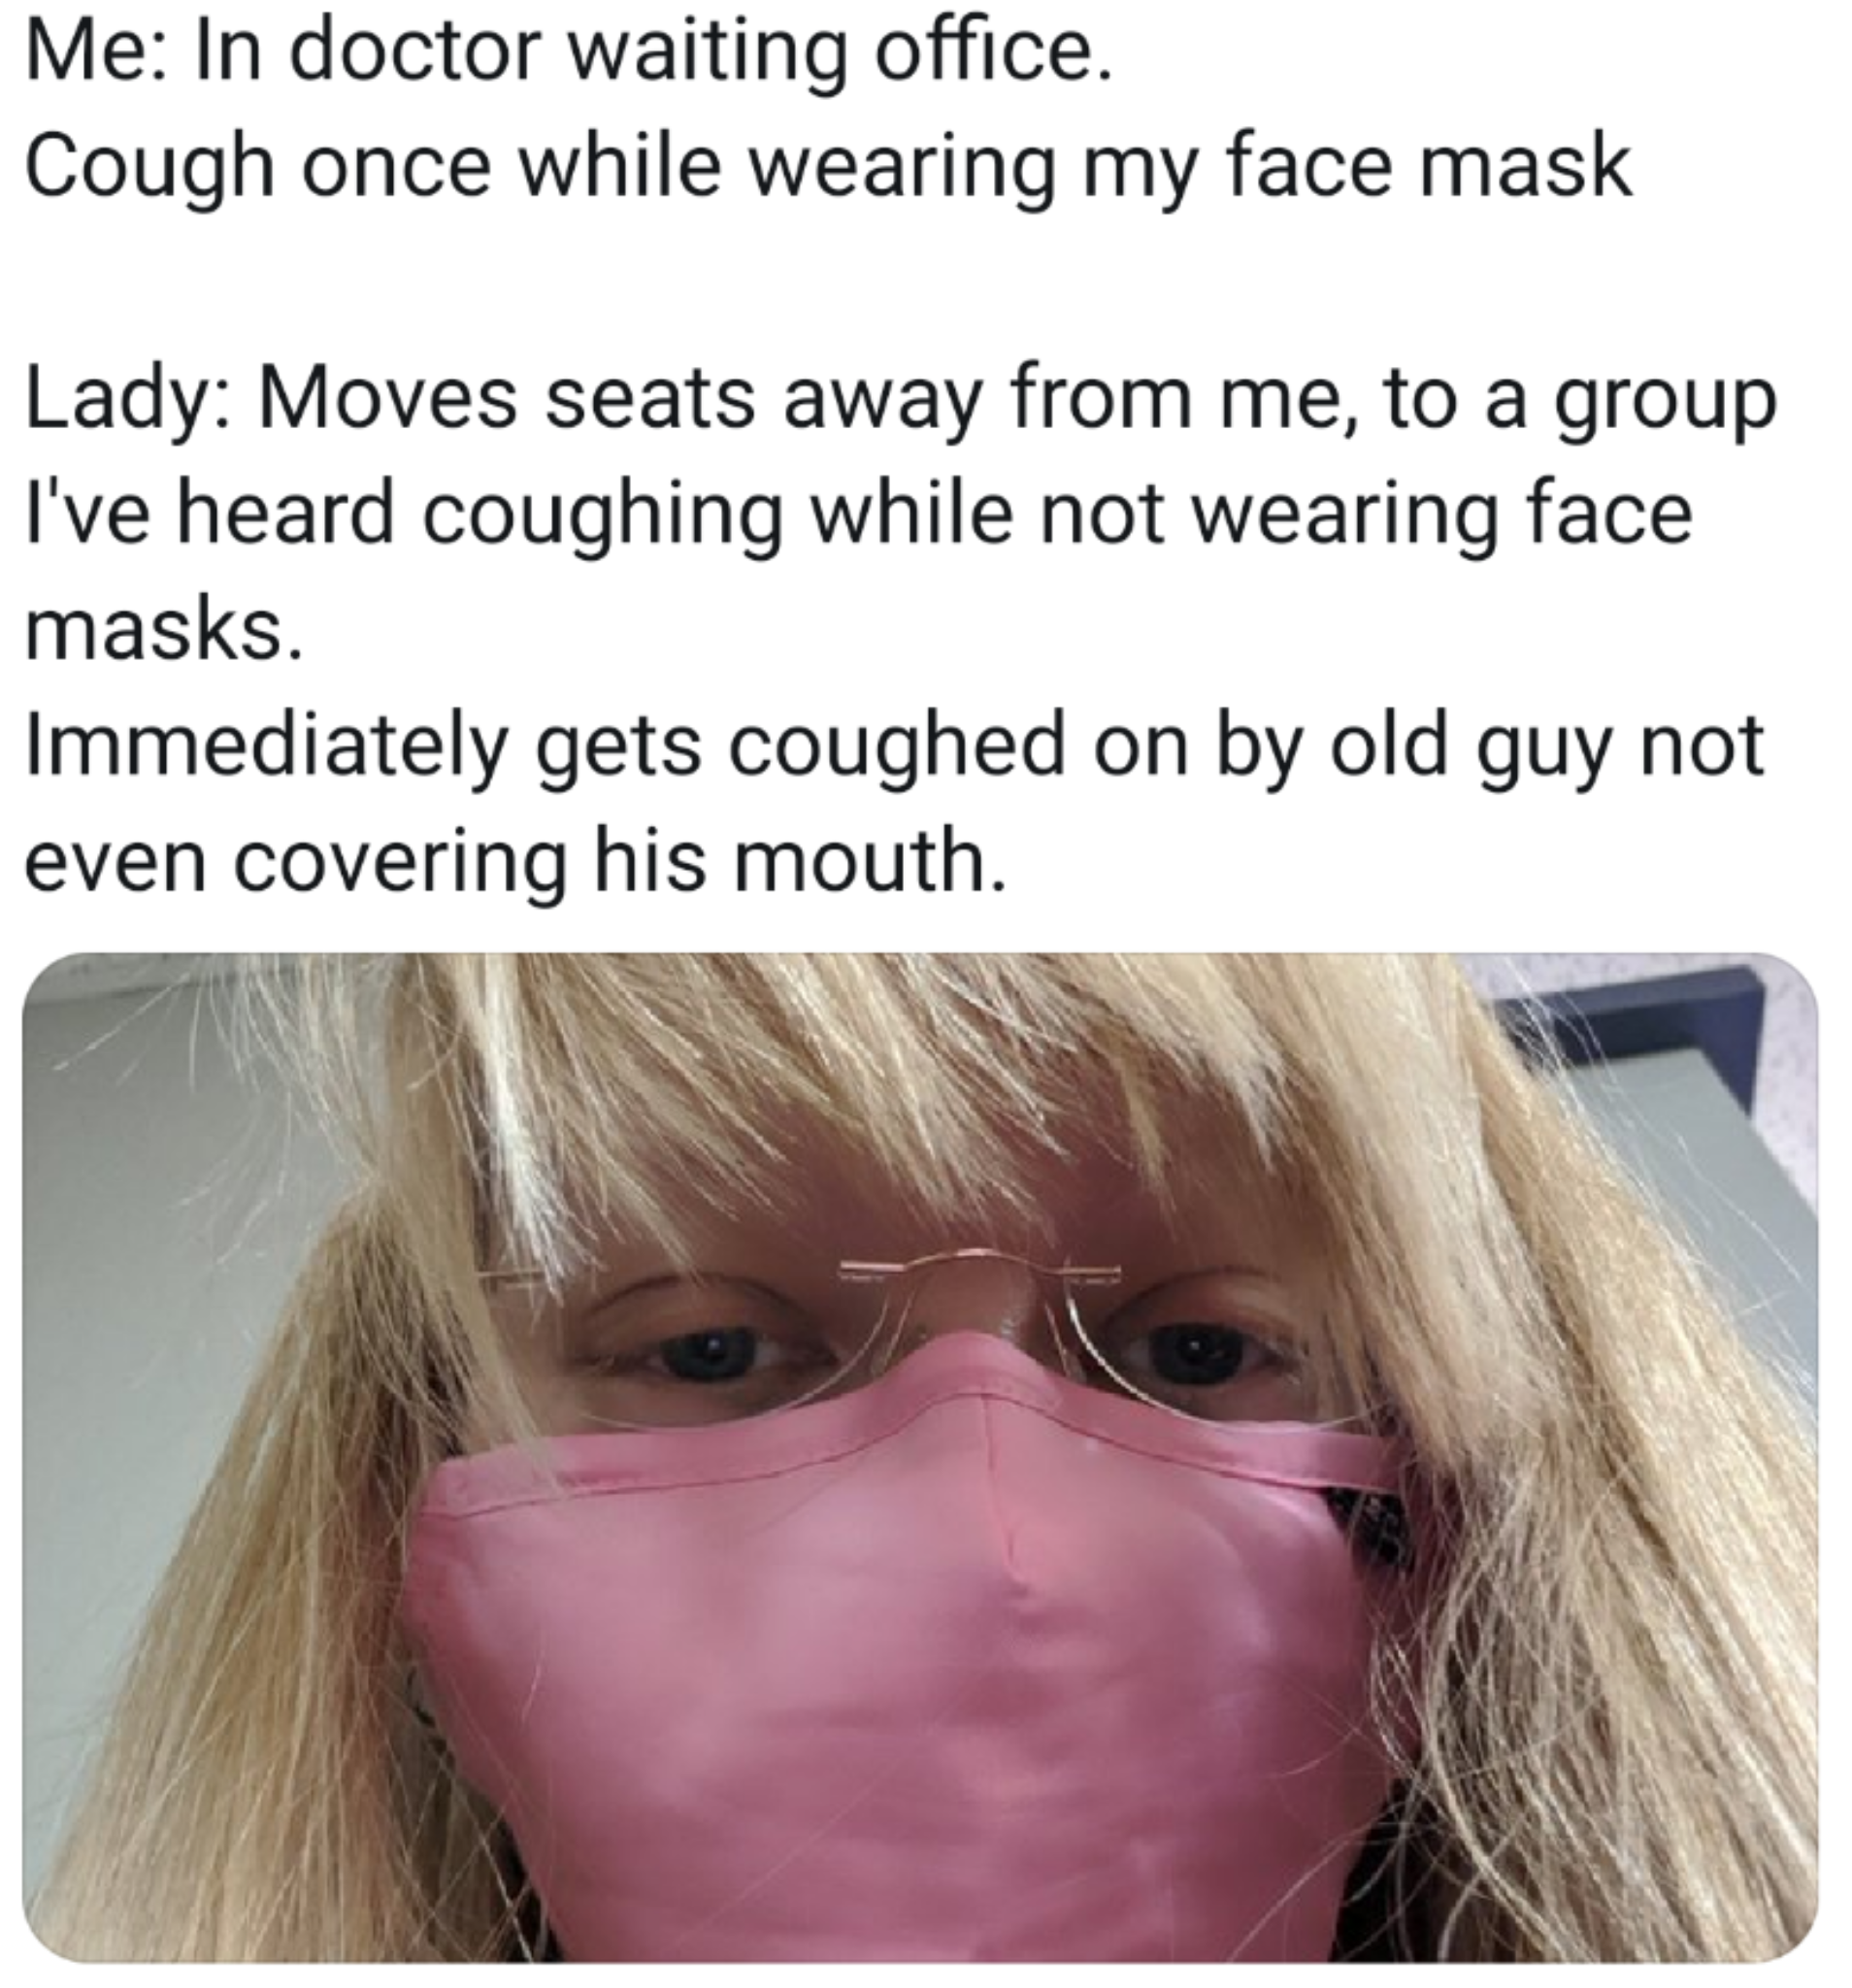 photo caption - Me In doctor waiting office. Cough once while wearing my face mask Lady Moves seats away from me, to a group I've heard coughing while not wearing face masks. Immediately gets coughed on by old guy not even covering his mouth.